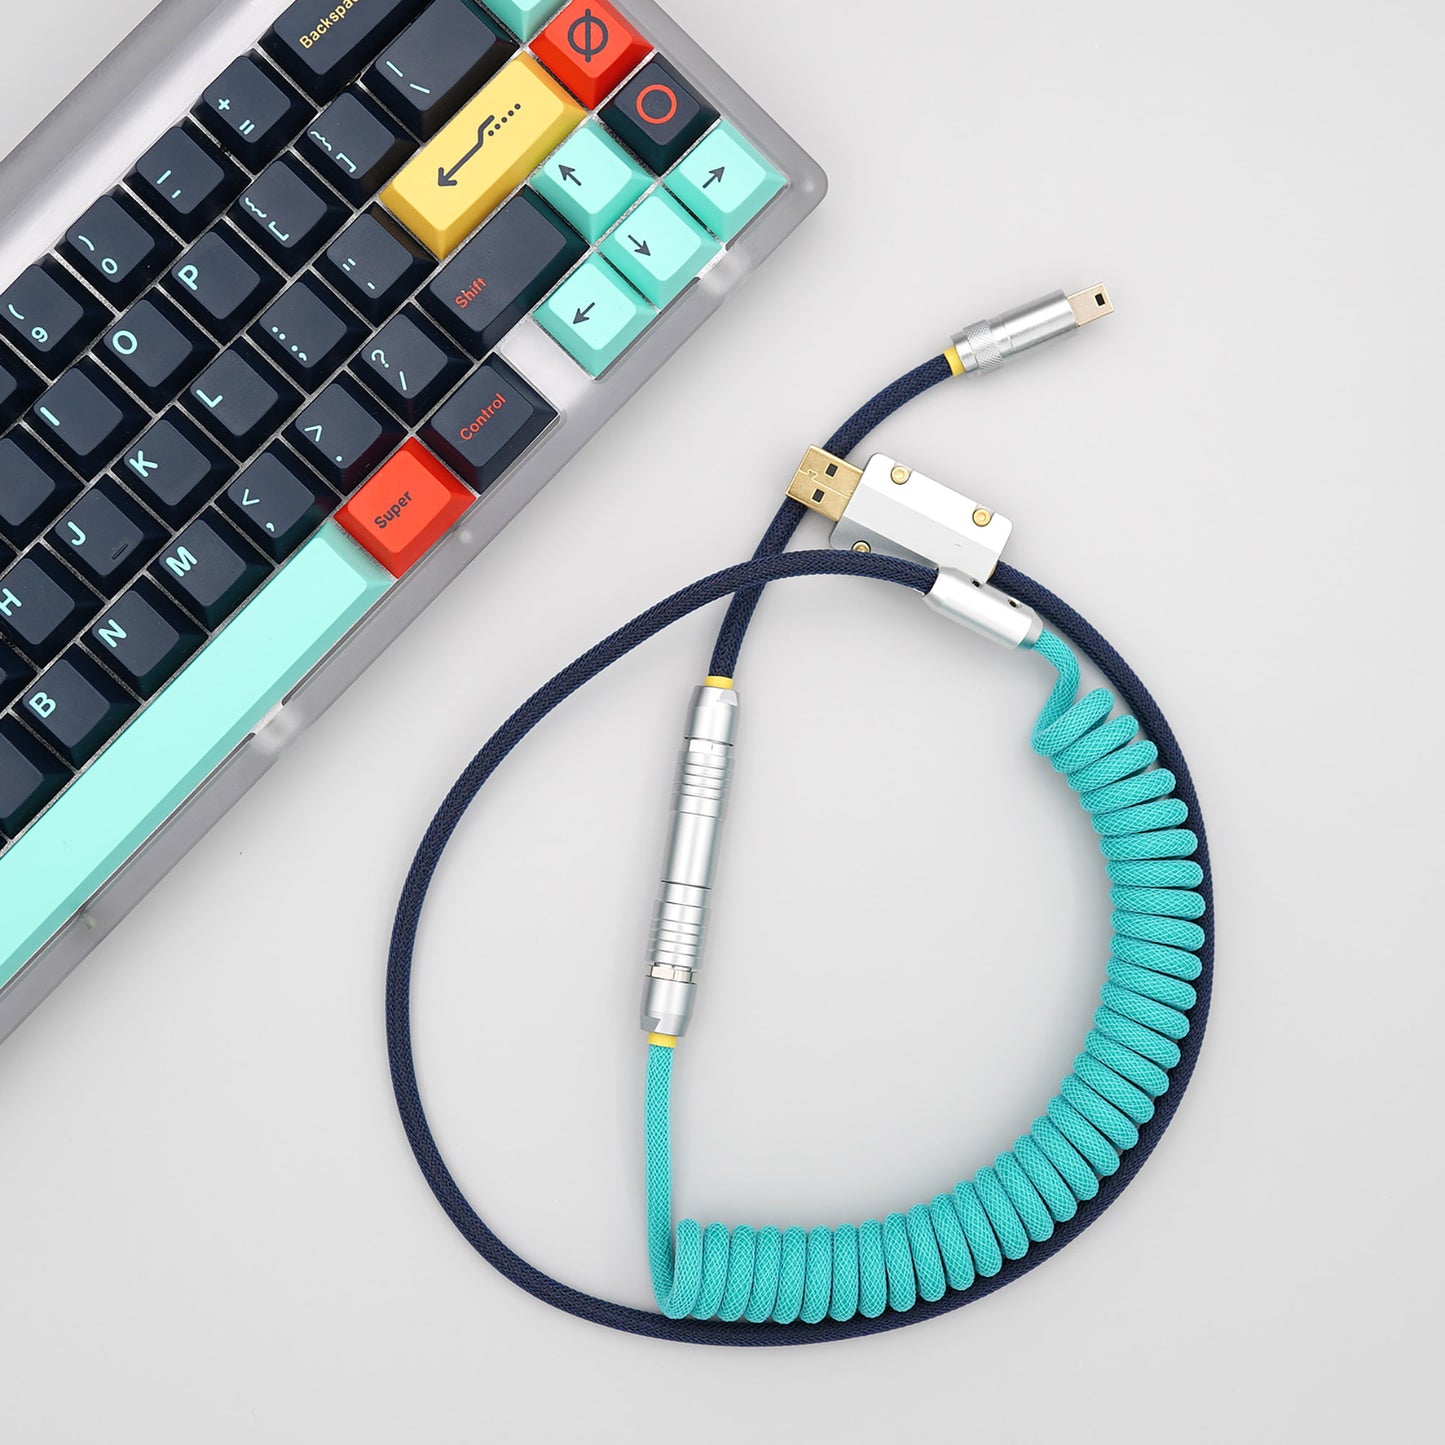 Sleeved Coiled Keyboard Aviator Cable, Lemo Style Connector - Teal/Navy